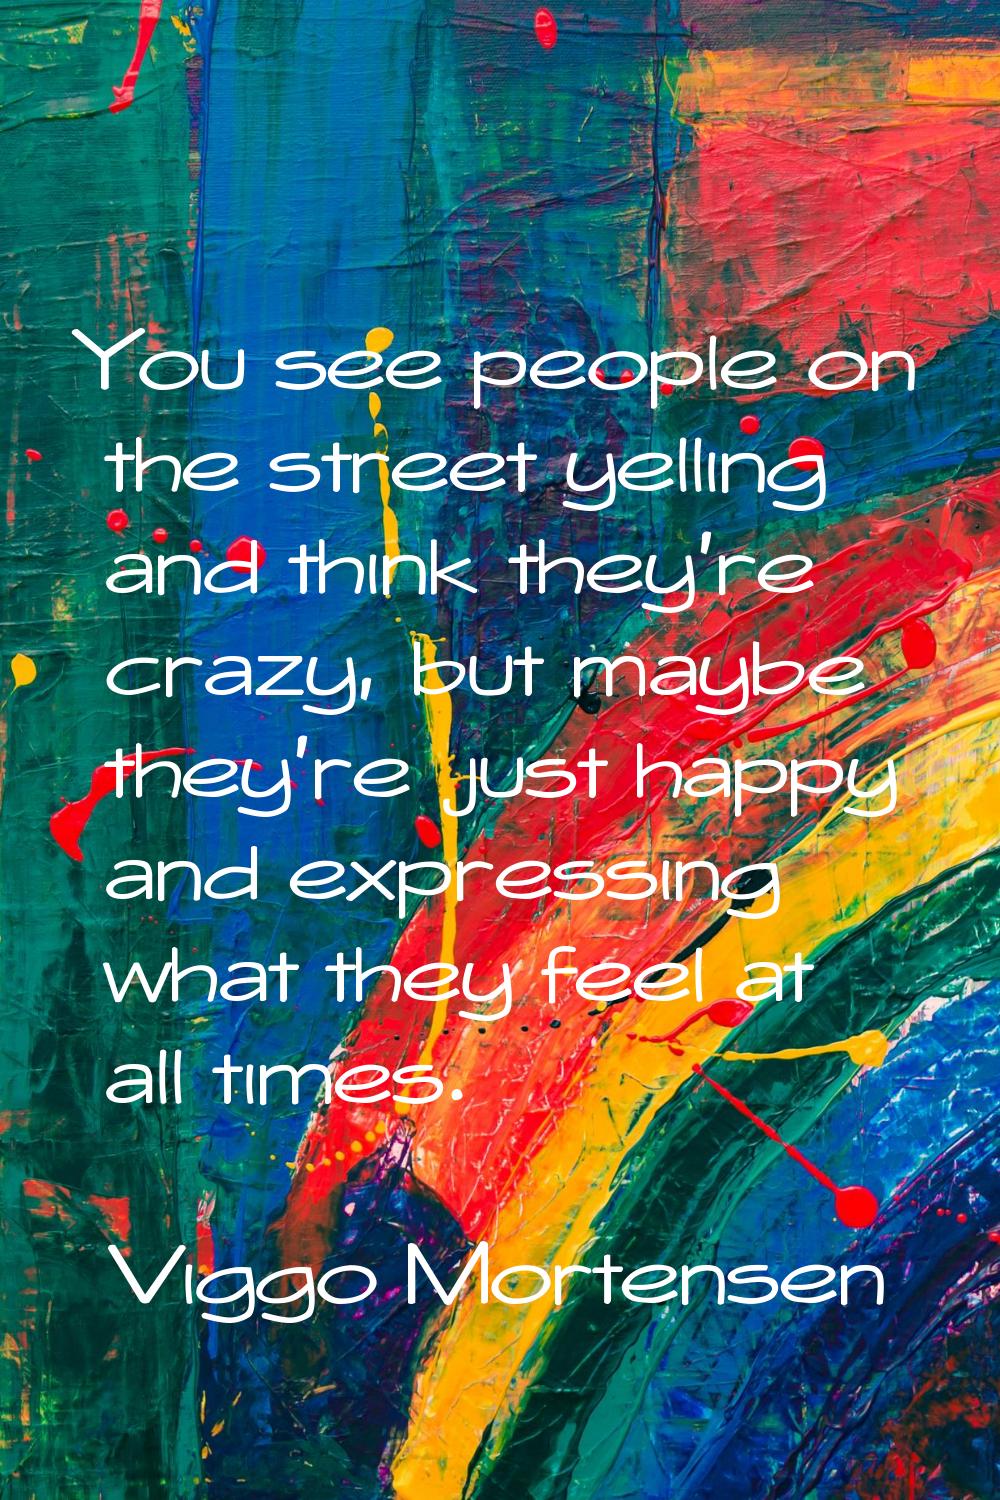 You see people on the street yelling and think they're crazy, but maybe they're just happy and expr